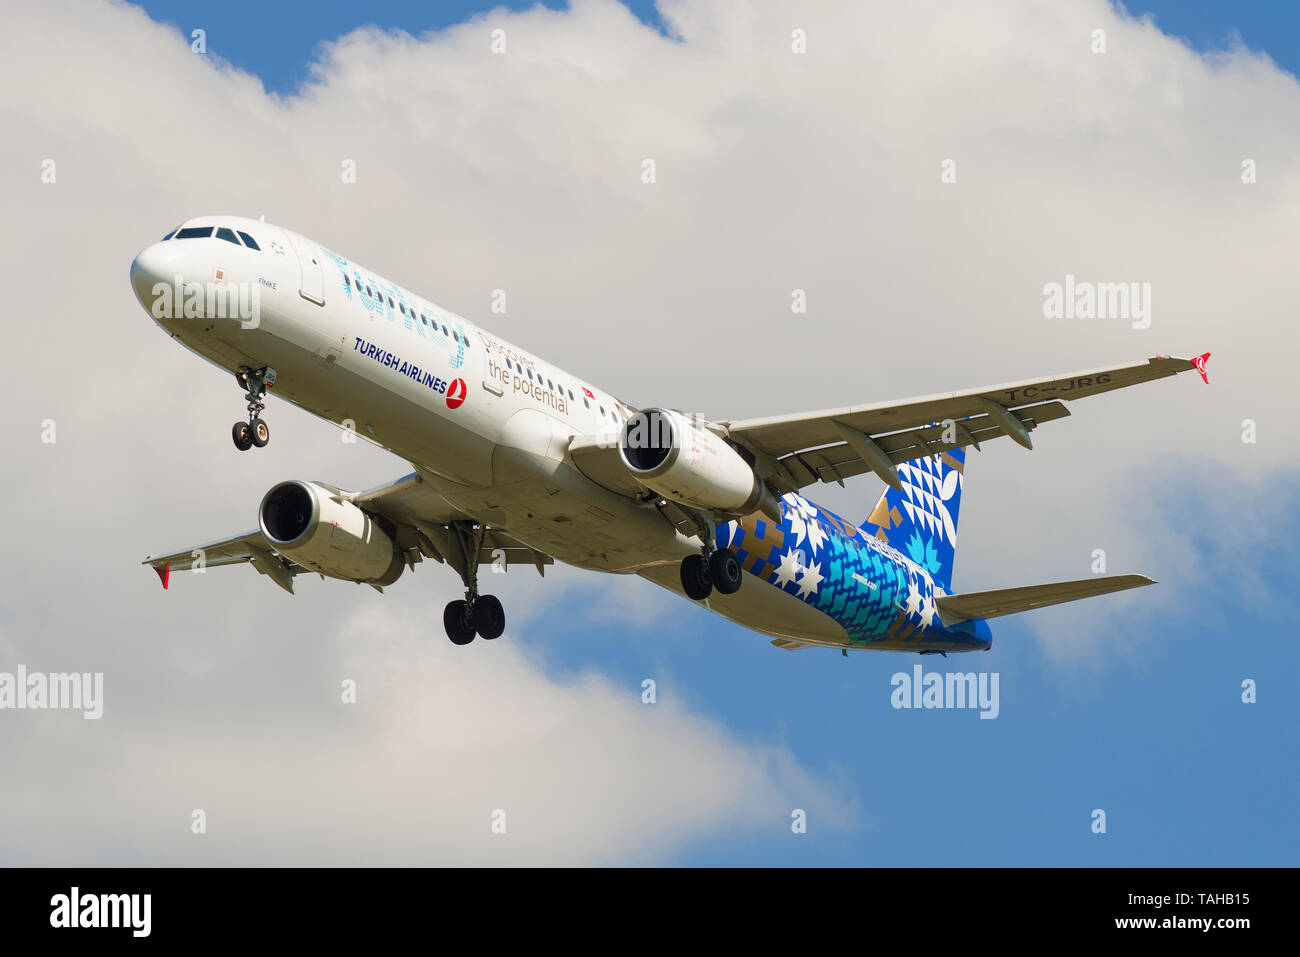 SAINT-PETERSBURG, RUSSIA - MAY 13, 2019: Airbus A321-200 (TC-JRG) of Turkish Airlines against a cloudy sky Stock Photo